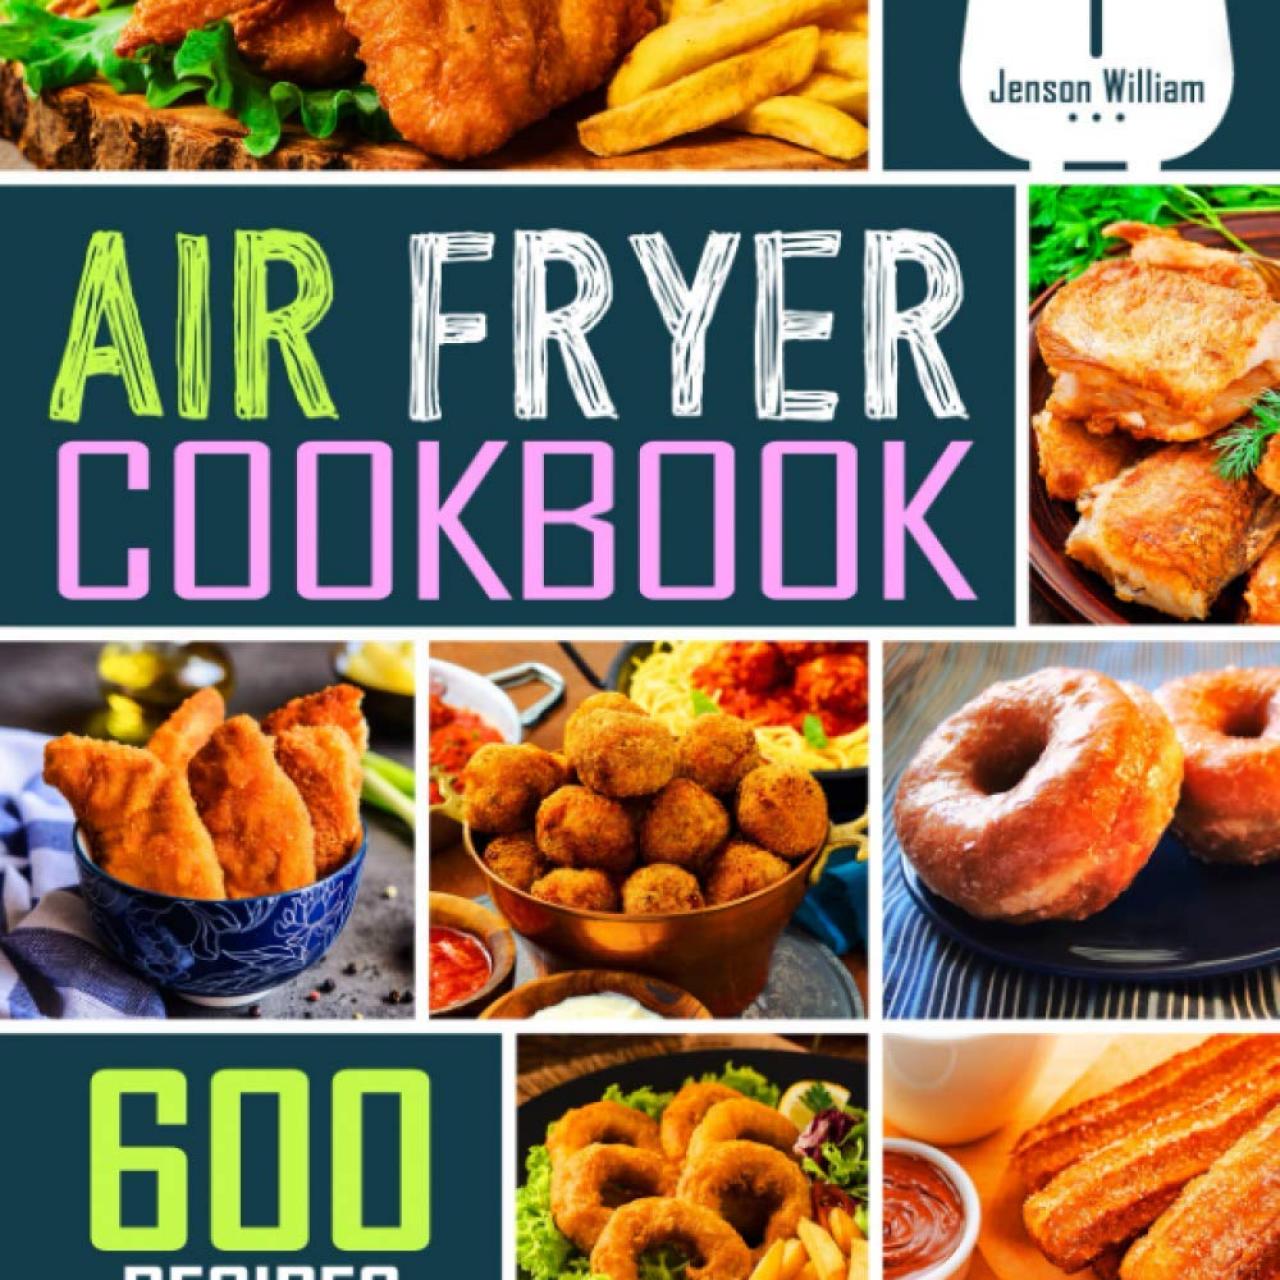 https://food.fnr.sndimg.com/content/dam/images/food/products/2021/12/7/rx_air-fryer-cookbook-600-effortless-air-fryer-recipes-for-beginners-and-advanced-users.jpeg.rend.hgtvcom.1280.1280.suffix/1638902987898.jpeg